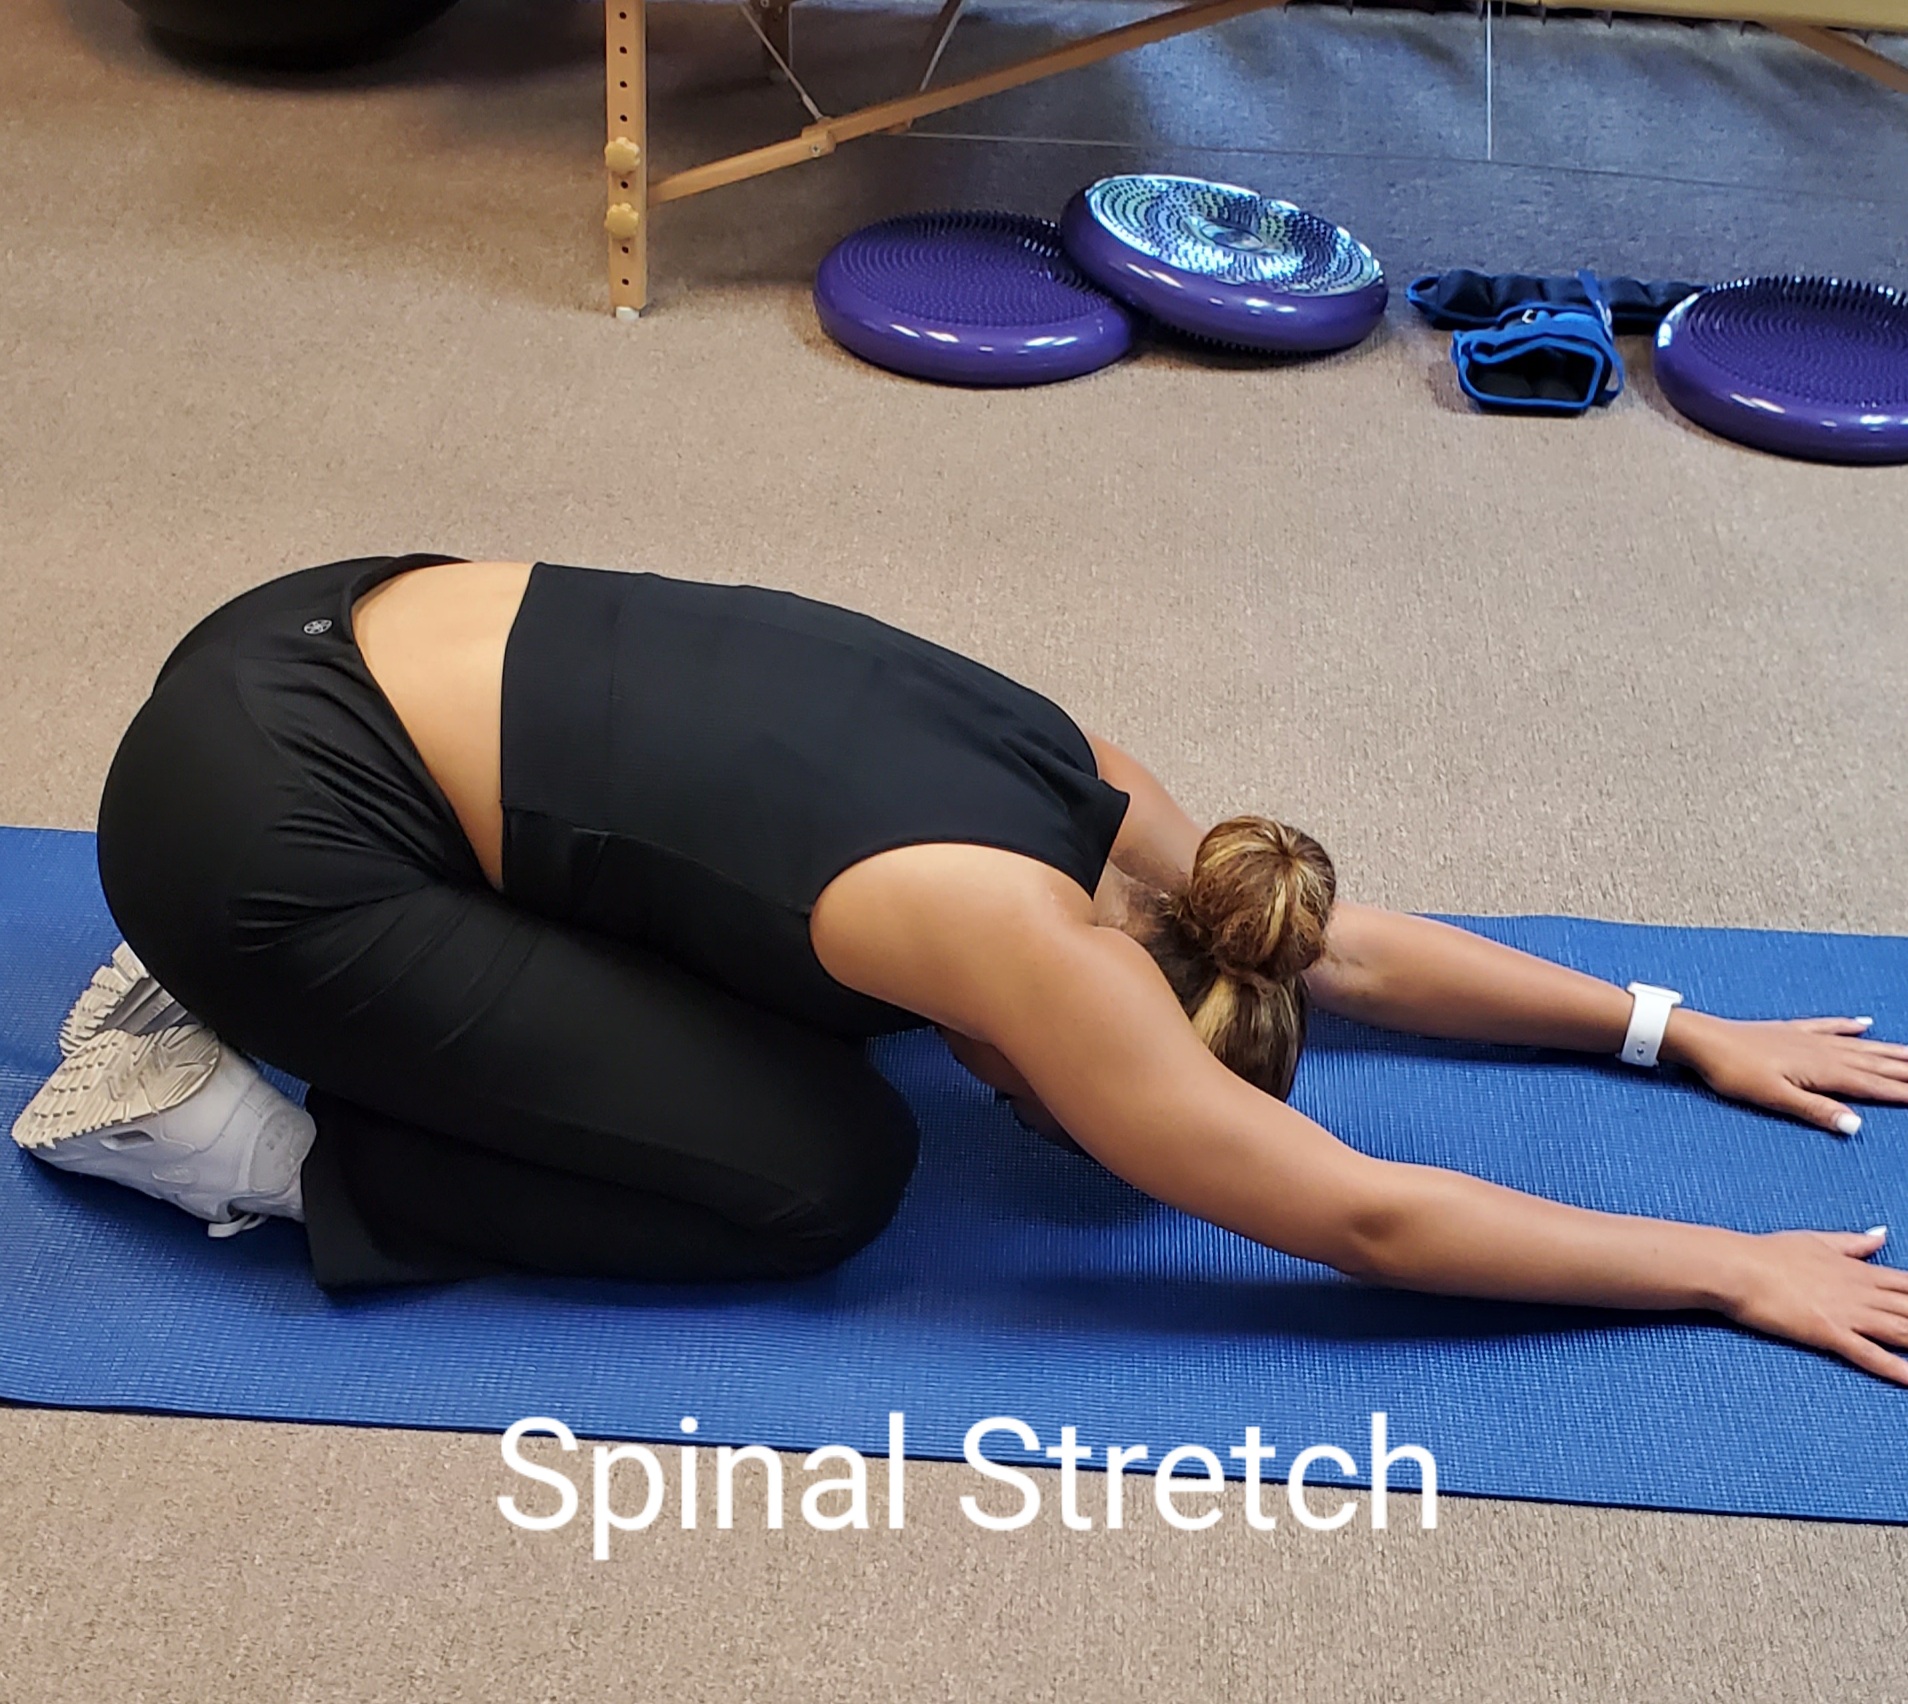 spinal stretch for exercise program